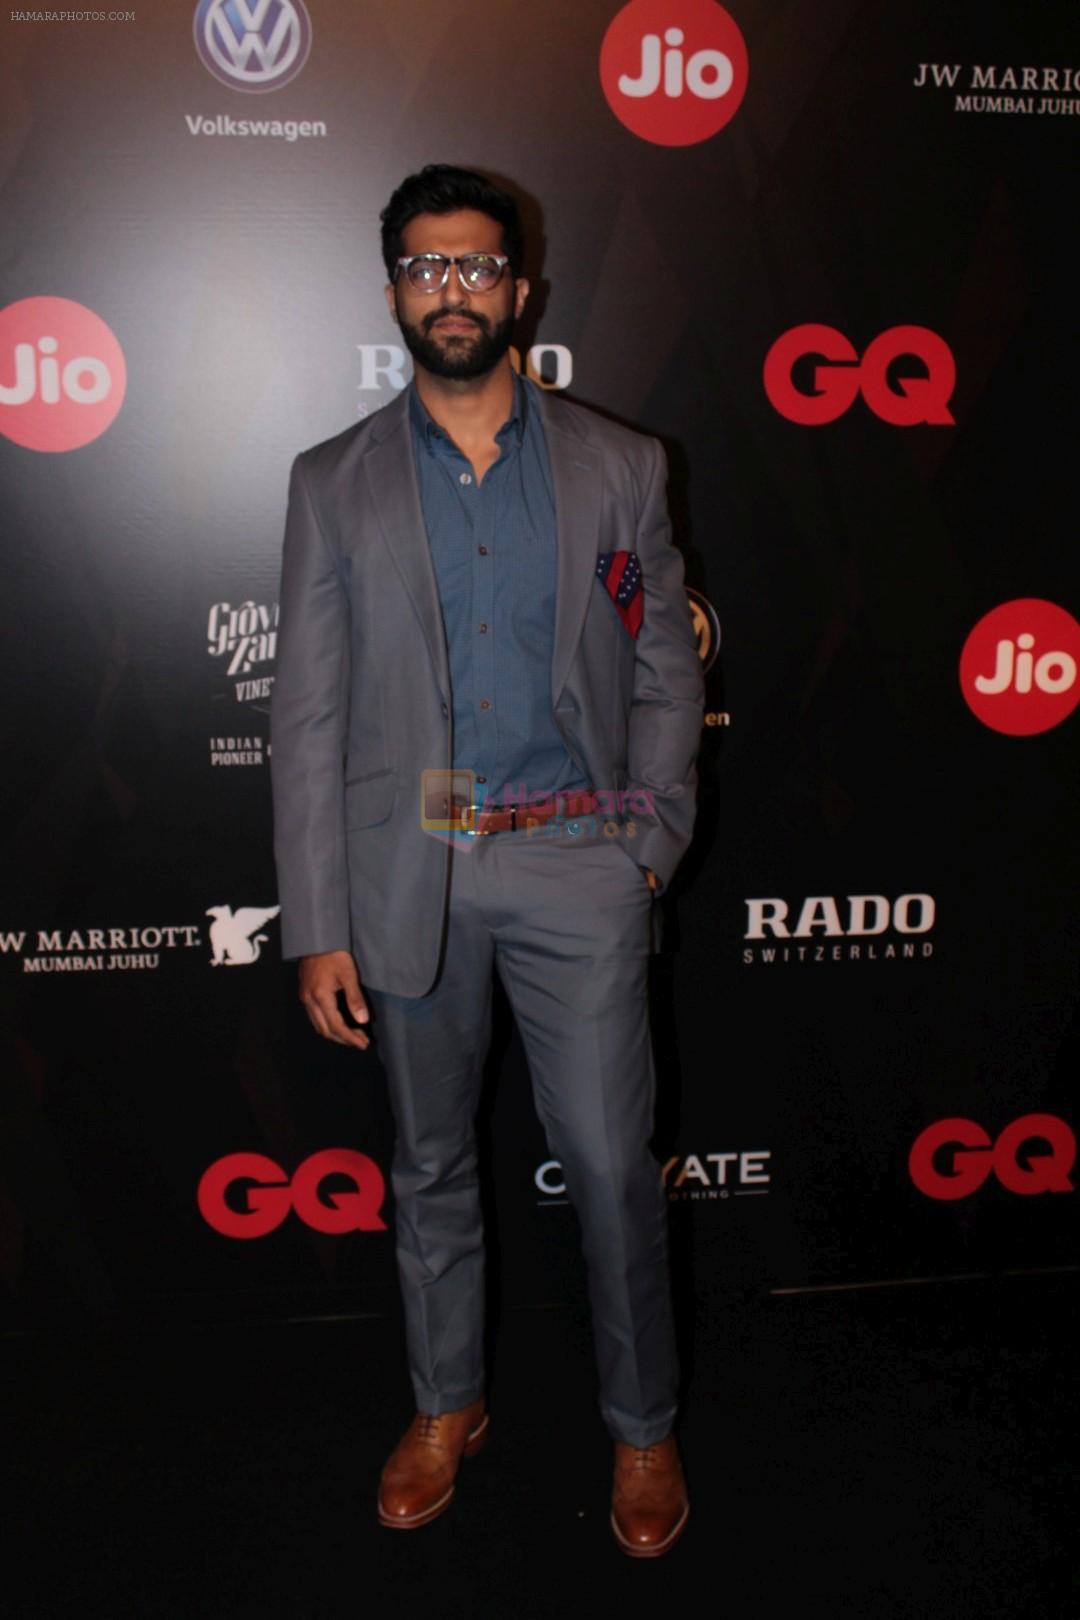 Akshay Oberoi at Star Studded Red Carpet For GQ Best Dressed 2017 on 4th June 2017